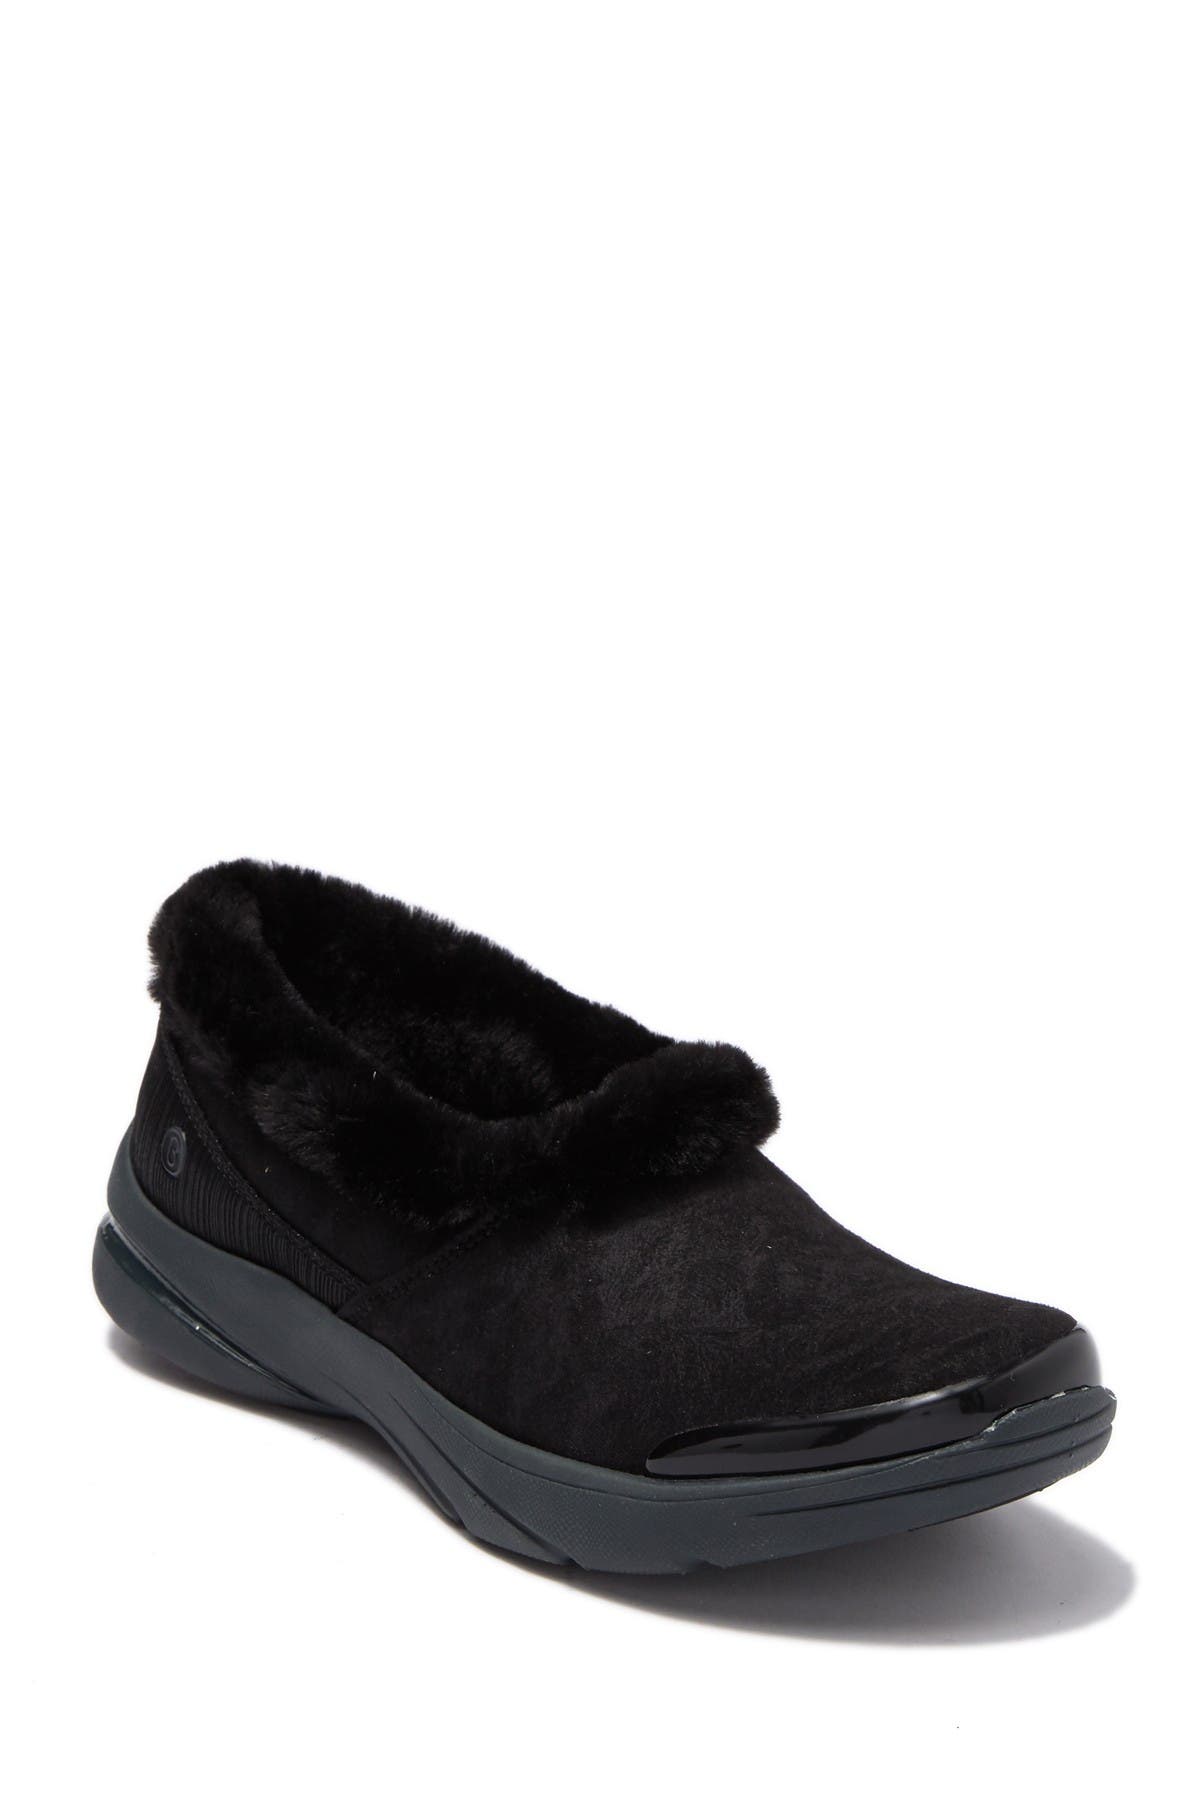 BZEES | Loveable Faux Fur Lined Slip-On 